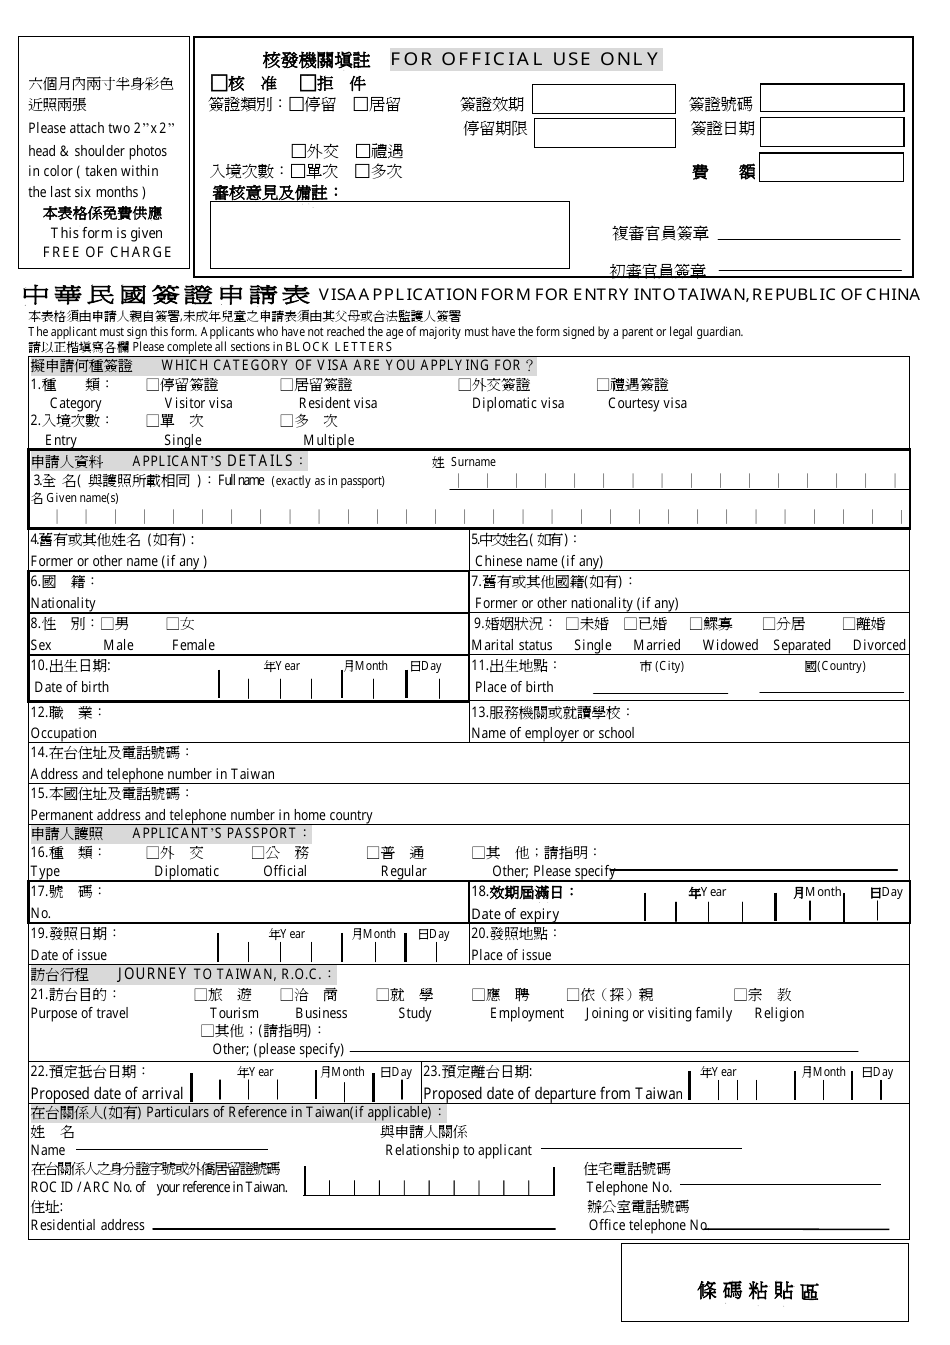 china-visa-application-form-for-entry-into-taiwan-download-printable